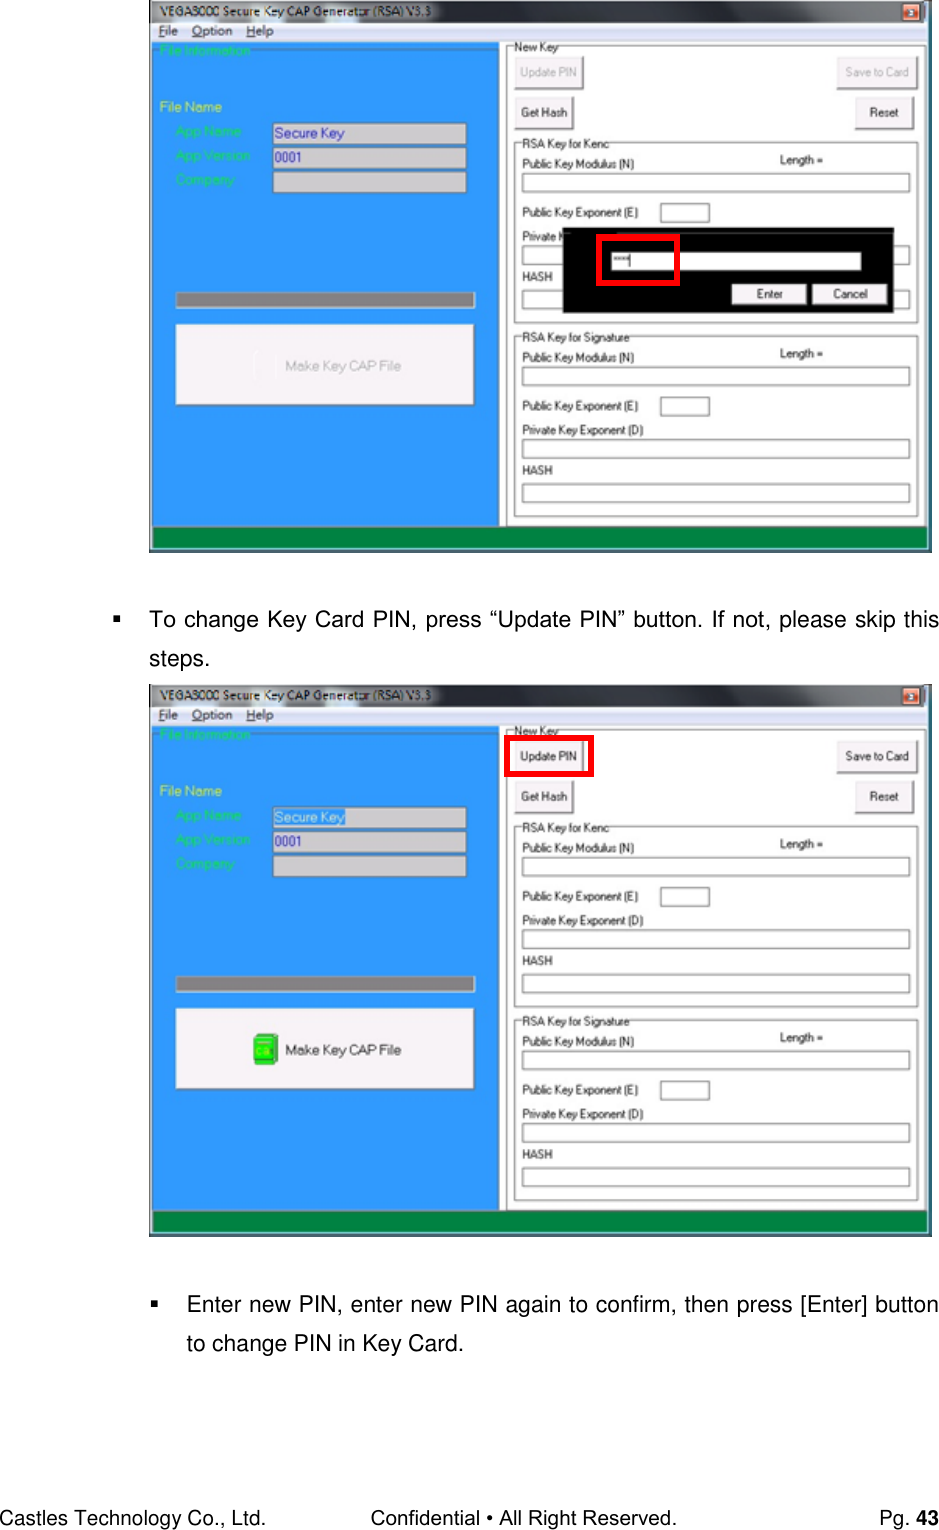 Castles Technology Co., Ltd. Confidential • All Right Reserved.  Pg. 43    To change Key Card PIN, press “Update PIN” button. If not, please skip this steps.     Enter new PIN, enter new PIN again to confirm, then press [Enter] button to change PIN in Key Card. 